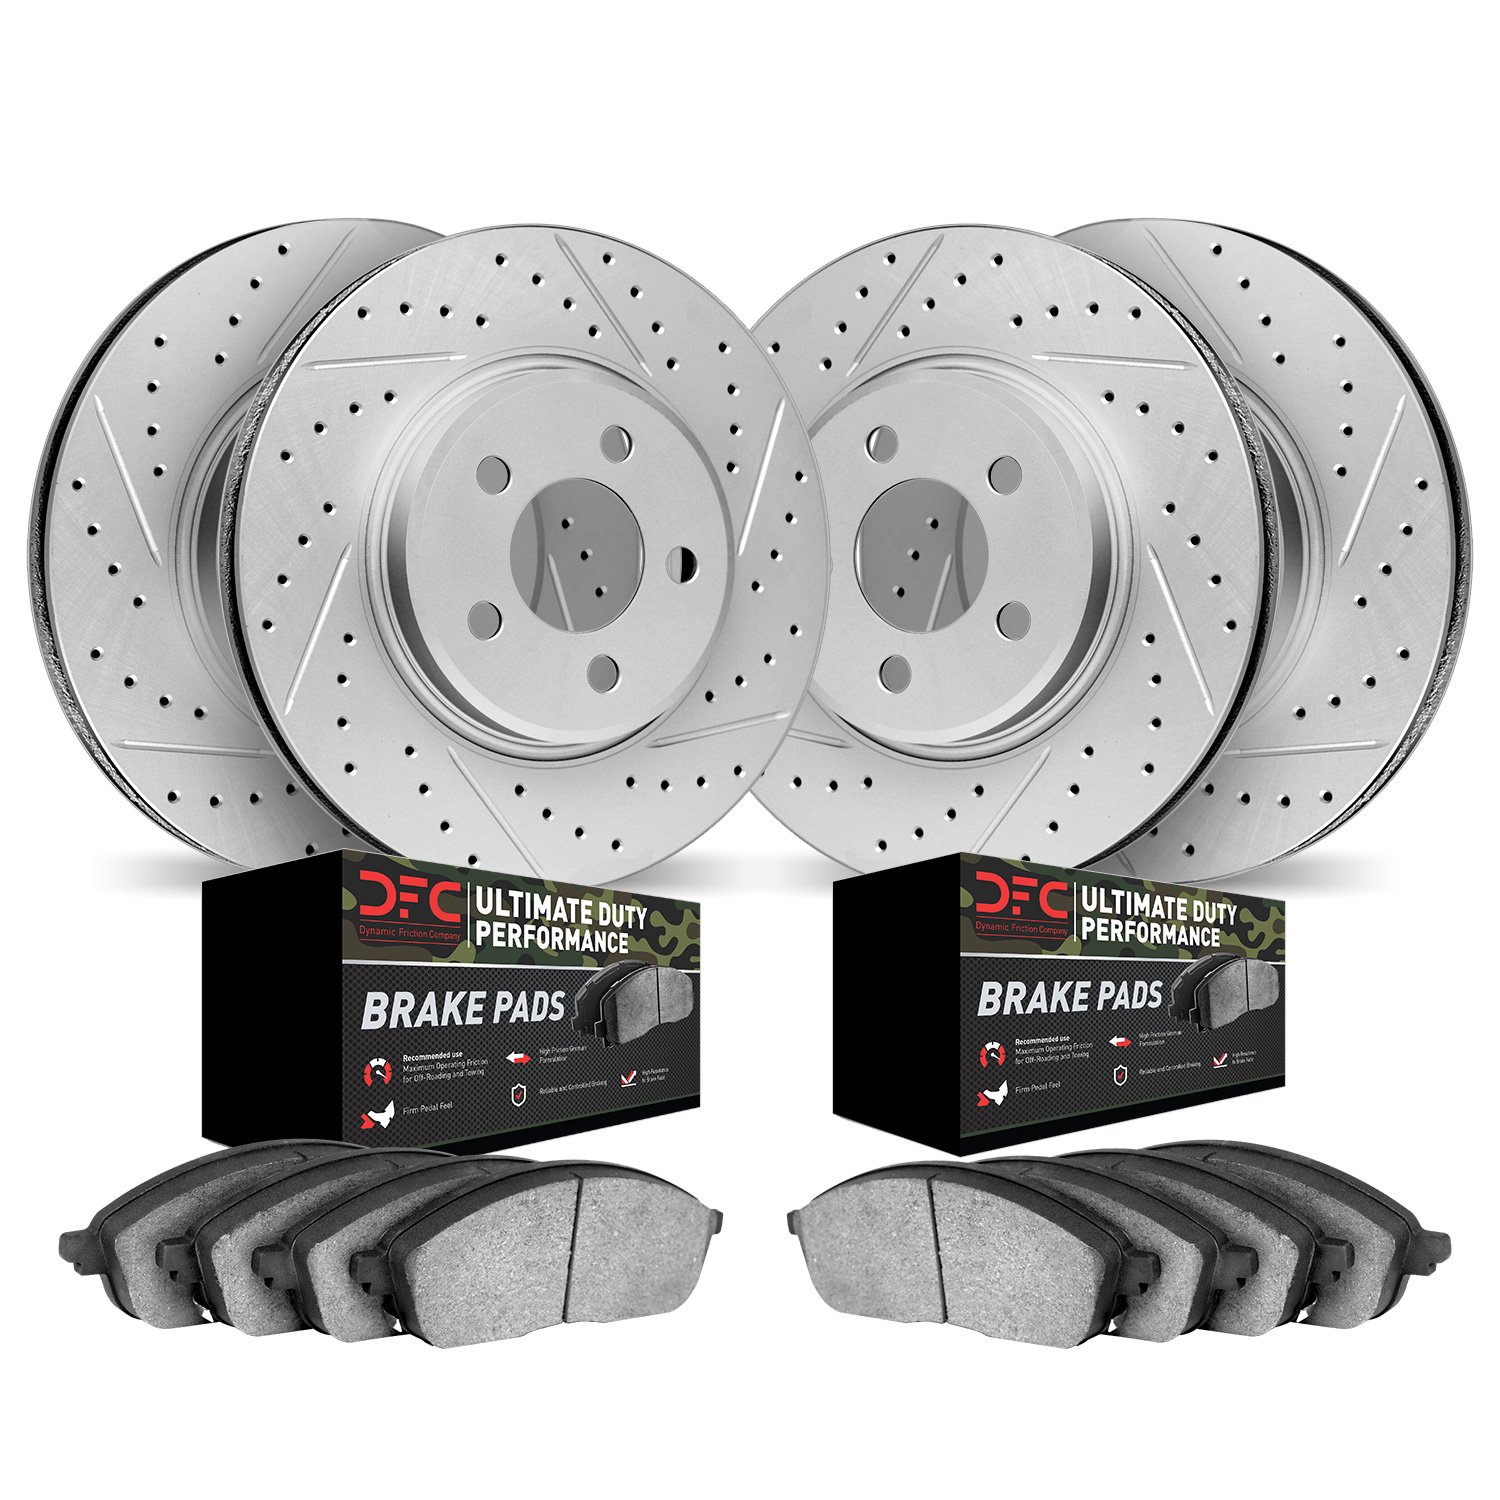 2404-40002 Geoperformance Drilled/Slotted Brake Rotors with Ultimate-Duty Brake Pads Kit, 2006-2018 Mopar, Position: Front and R